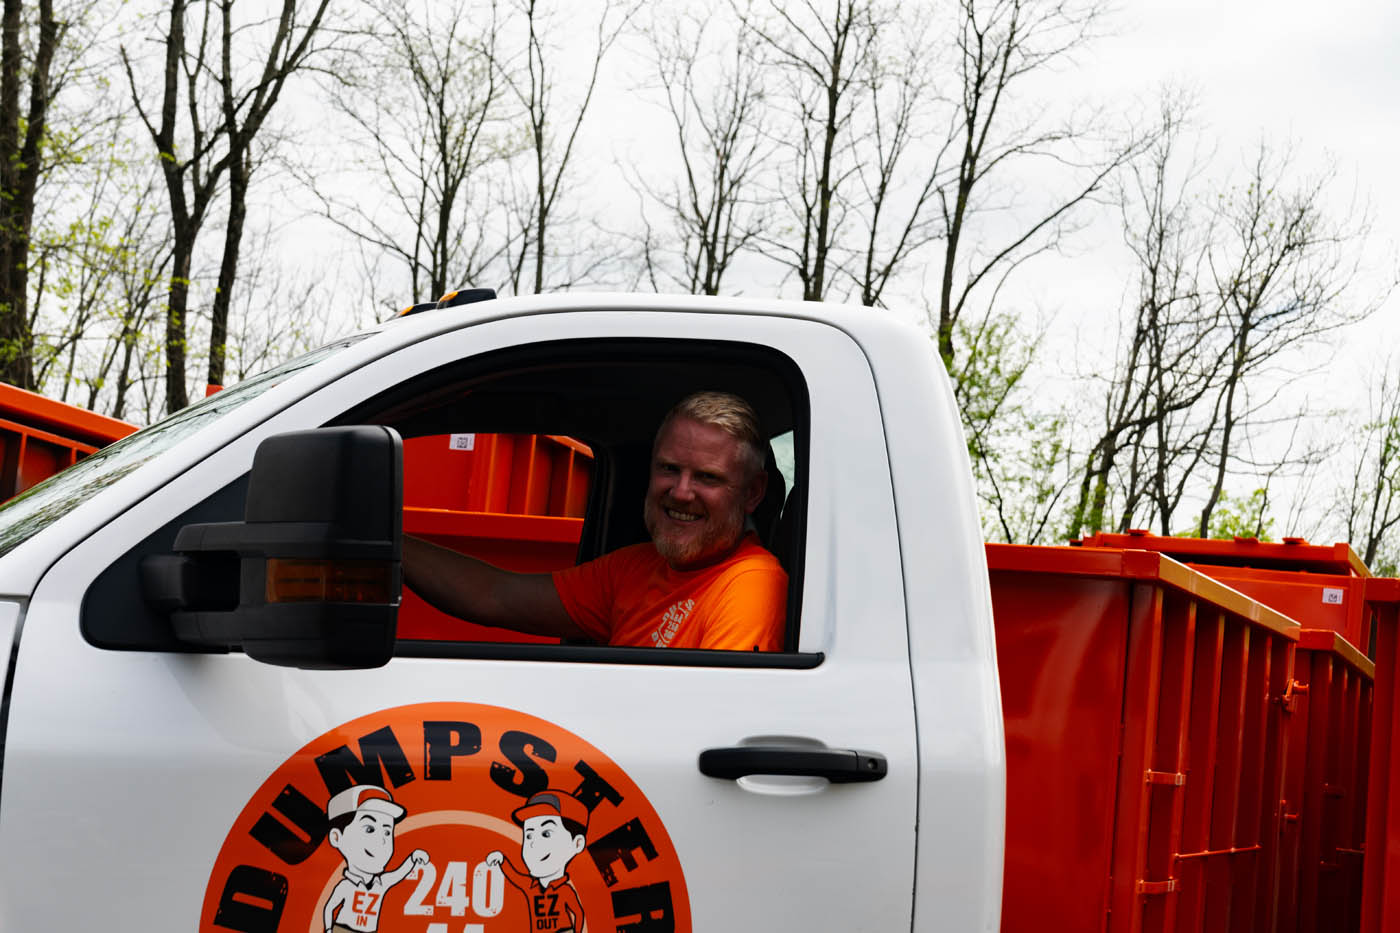 Dumpster Dudez truck - find reliable garbage dumpster rental in Reading / Berks County, PA.